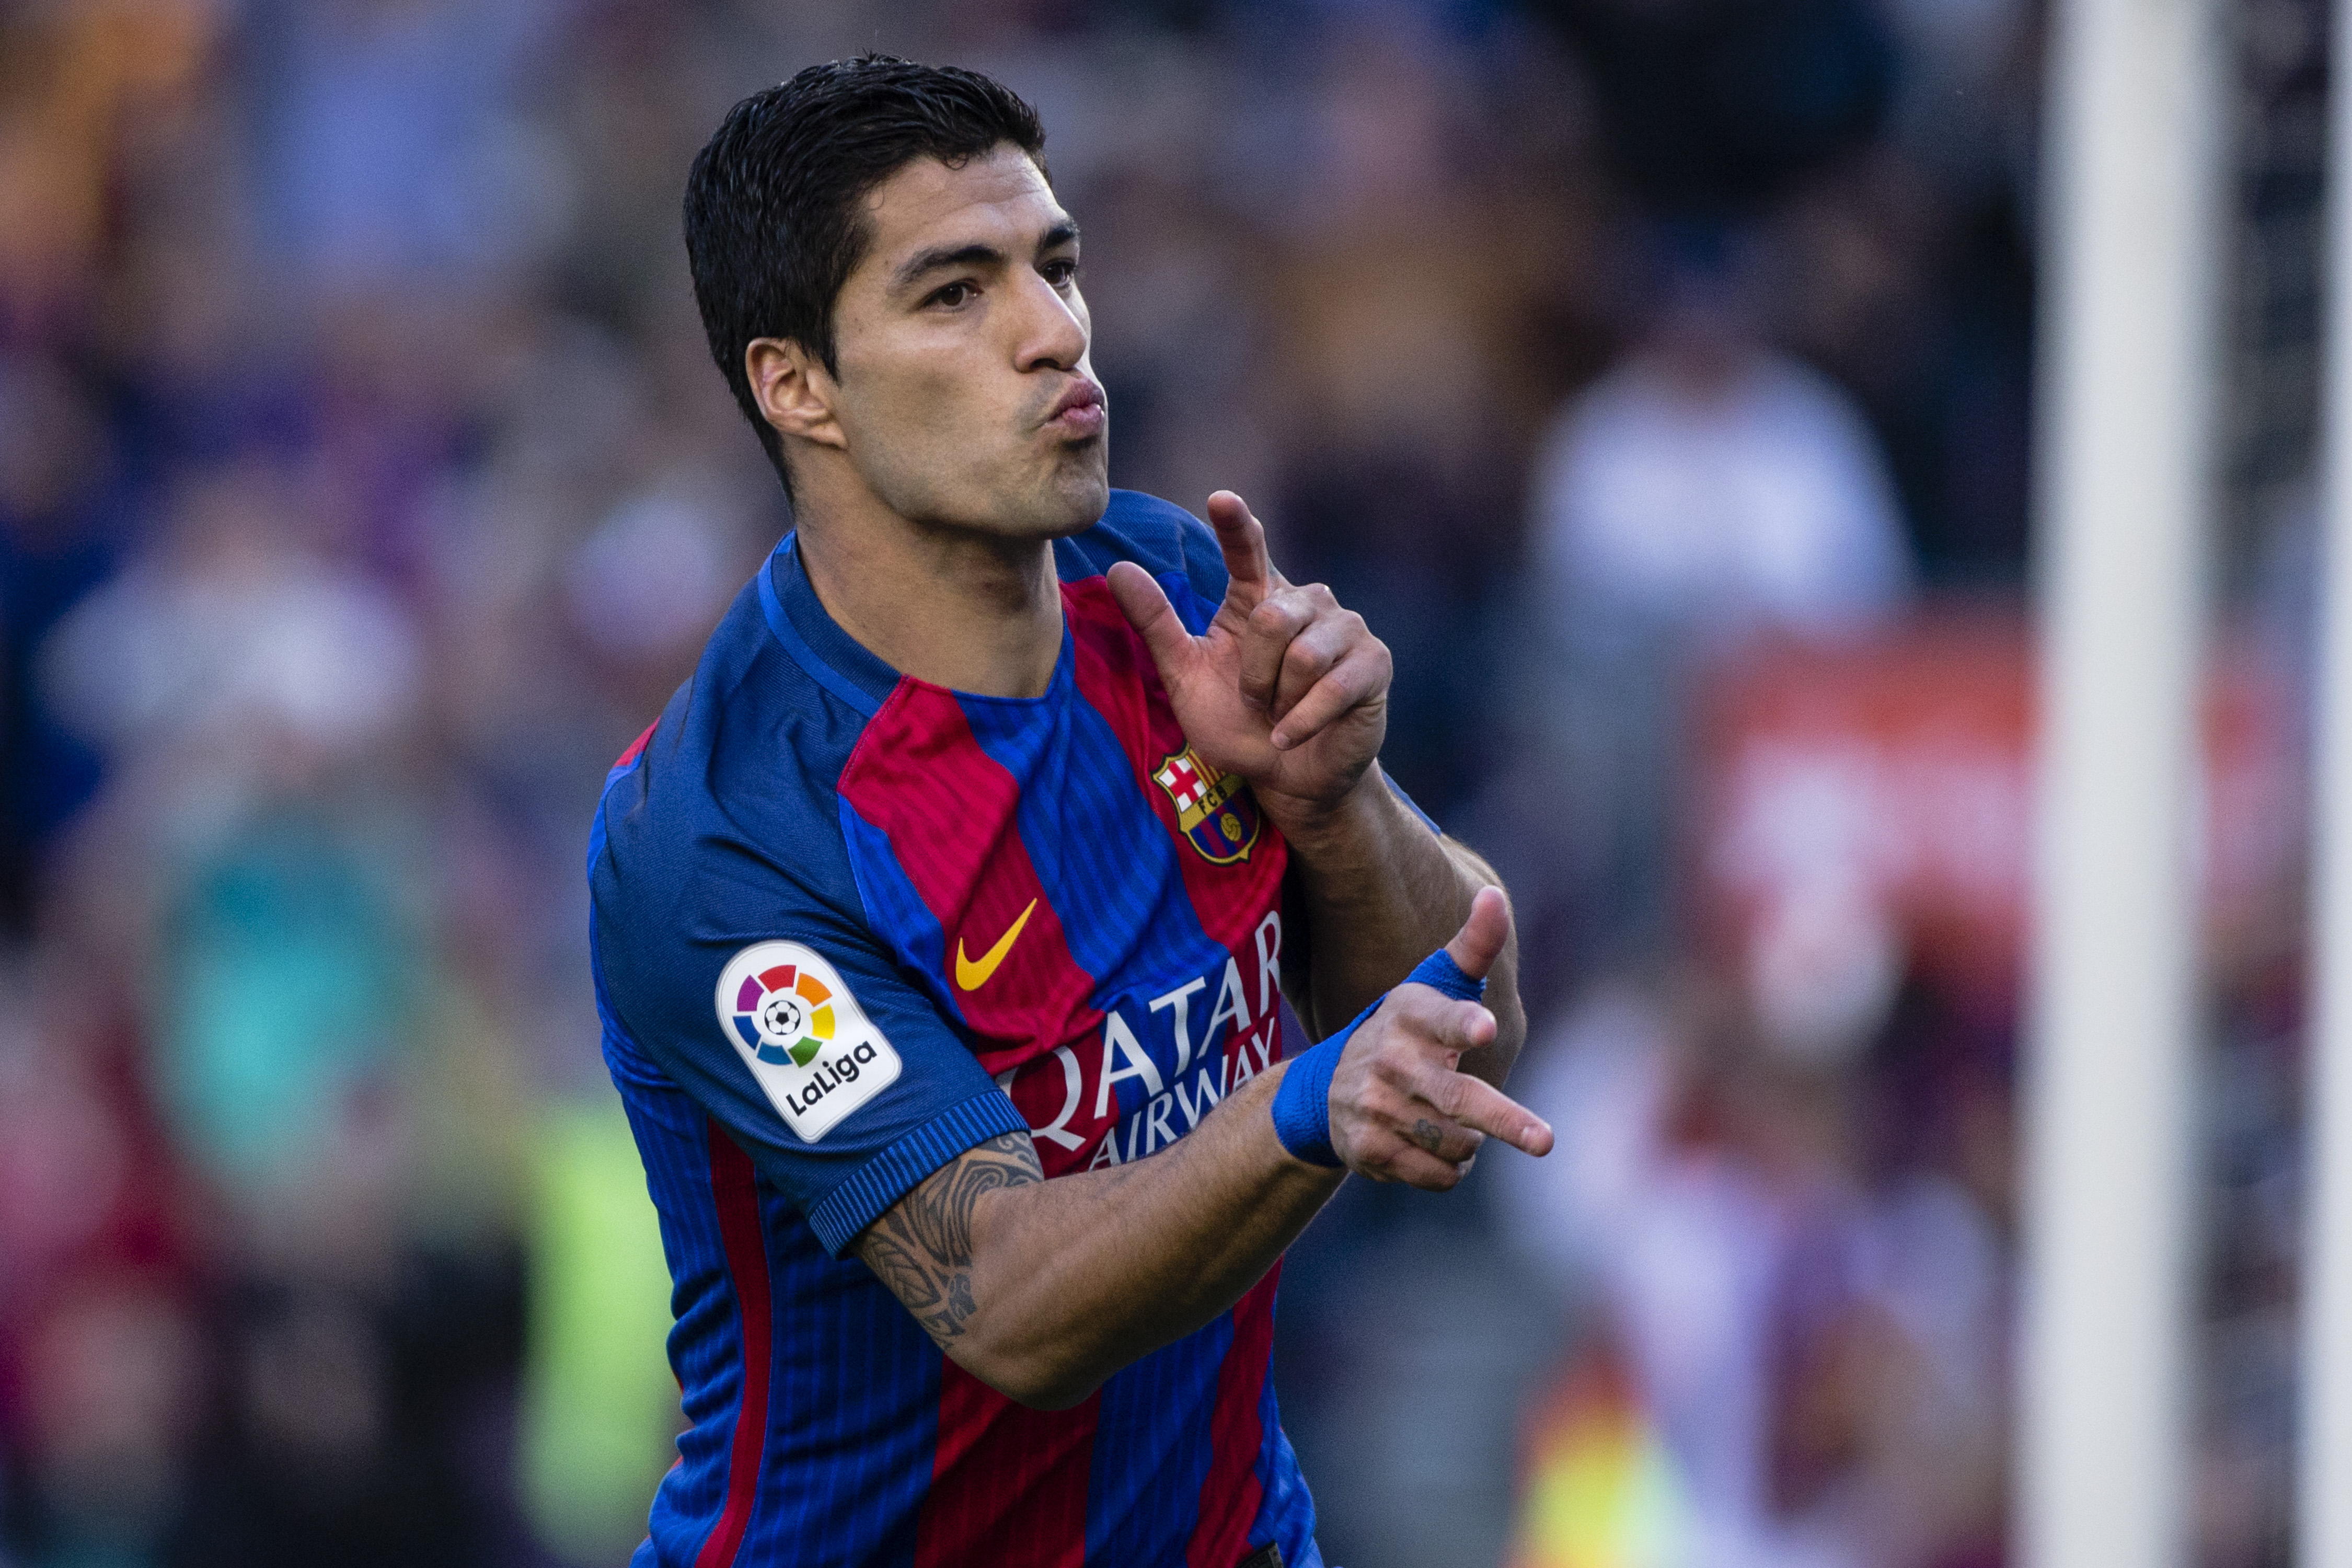 Luis Suarez celebrates after scoring for Barcelona against Villarreal in May 2017.